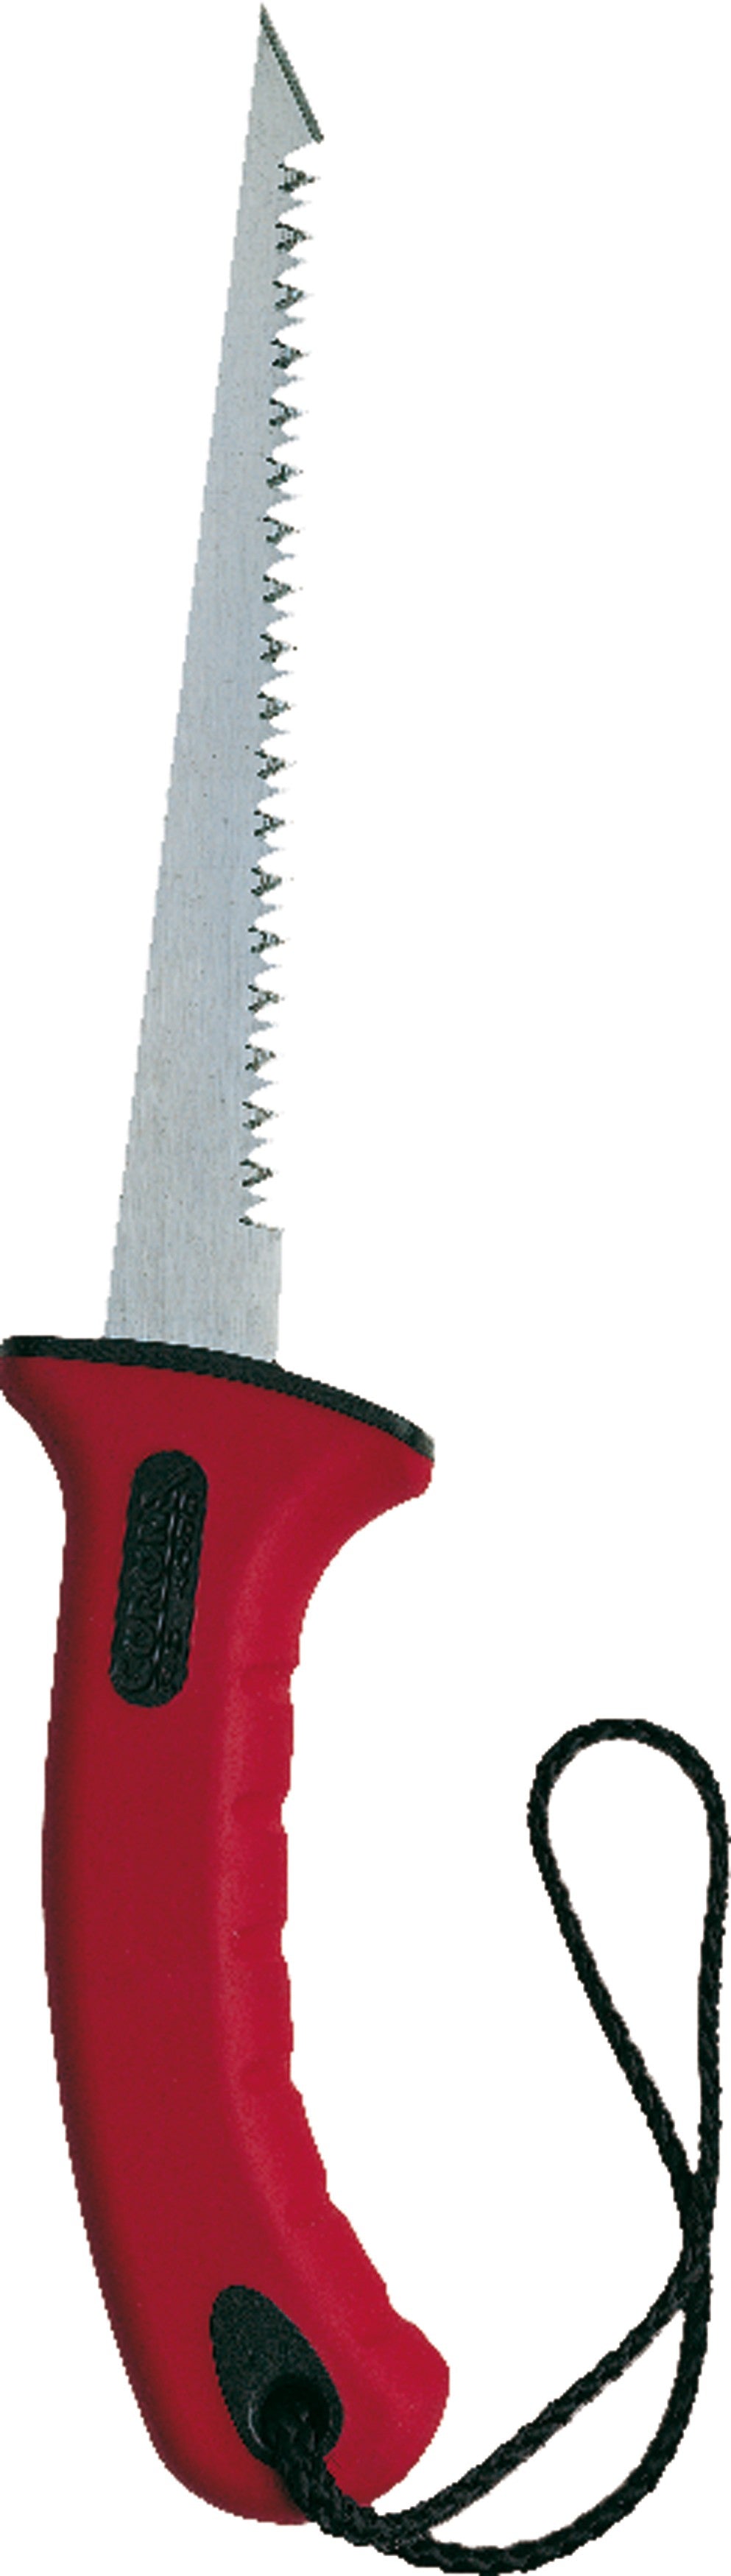 buy saws at cheap rate in bulk. wholesale & retail lawn & garden maintenance goods store.